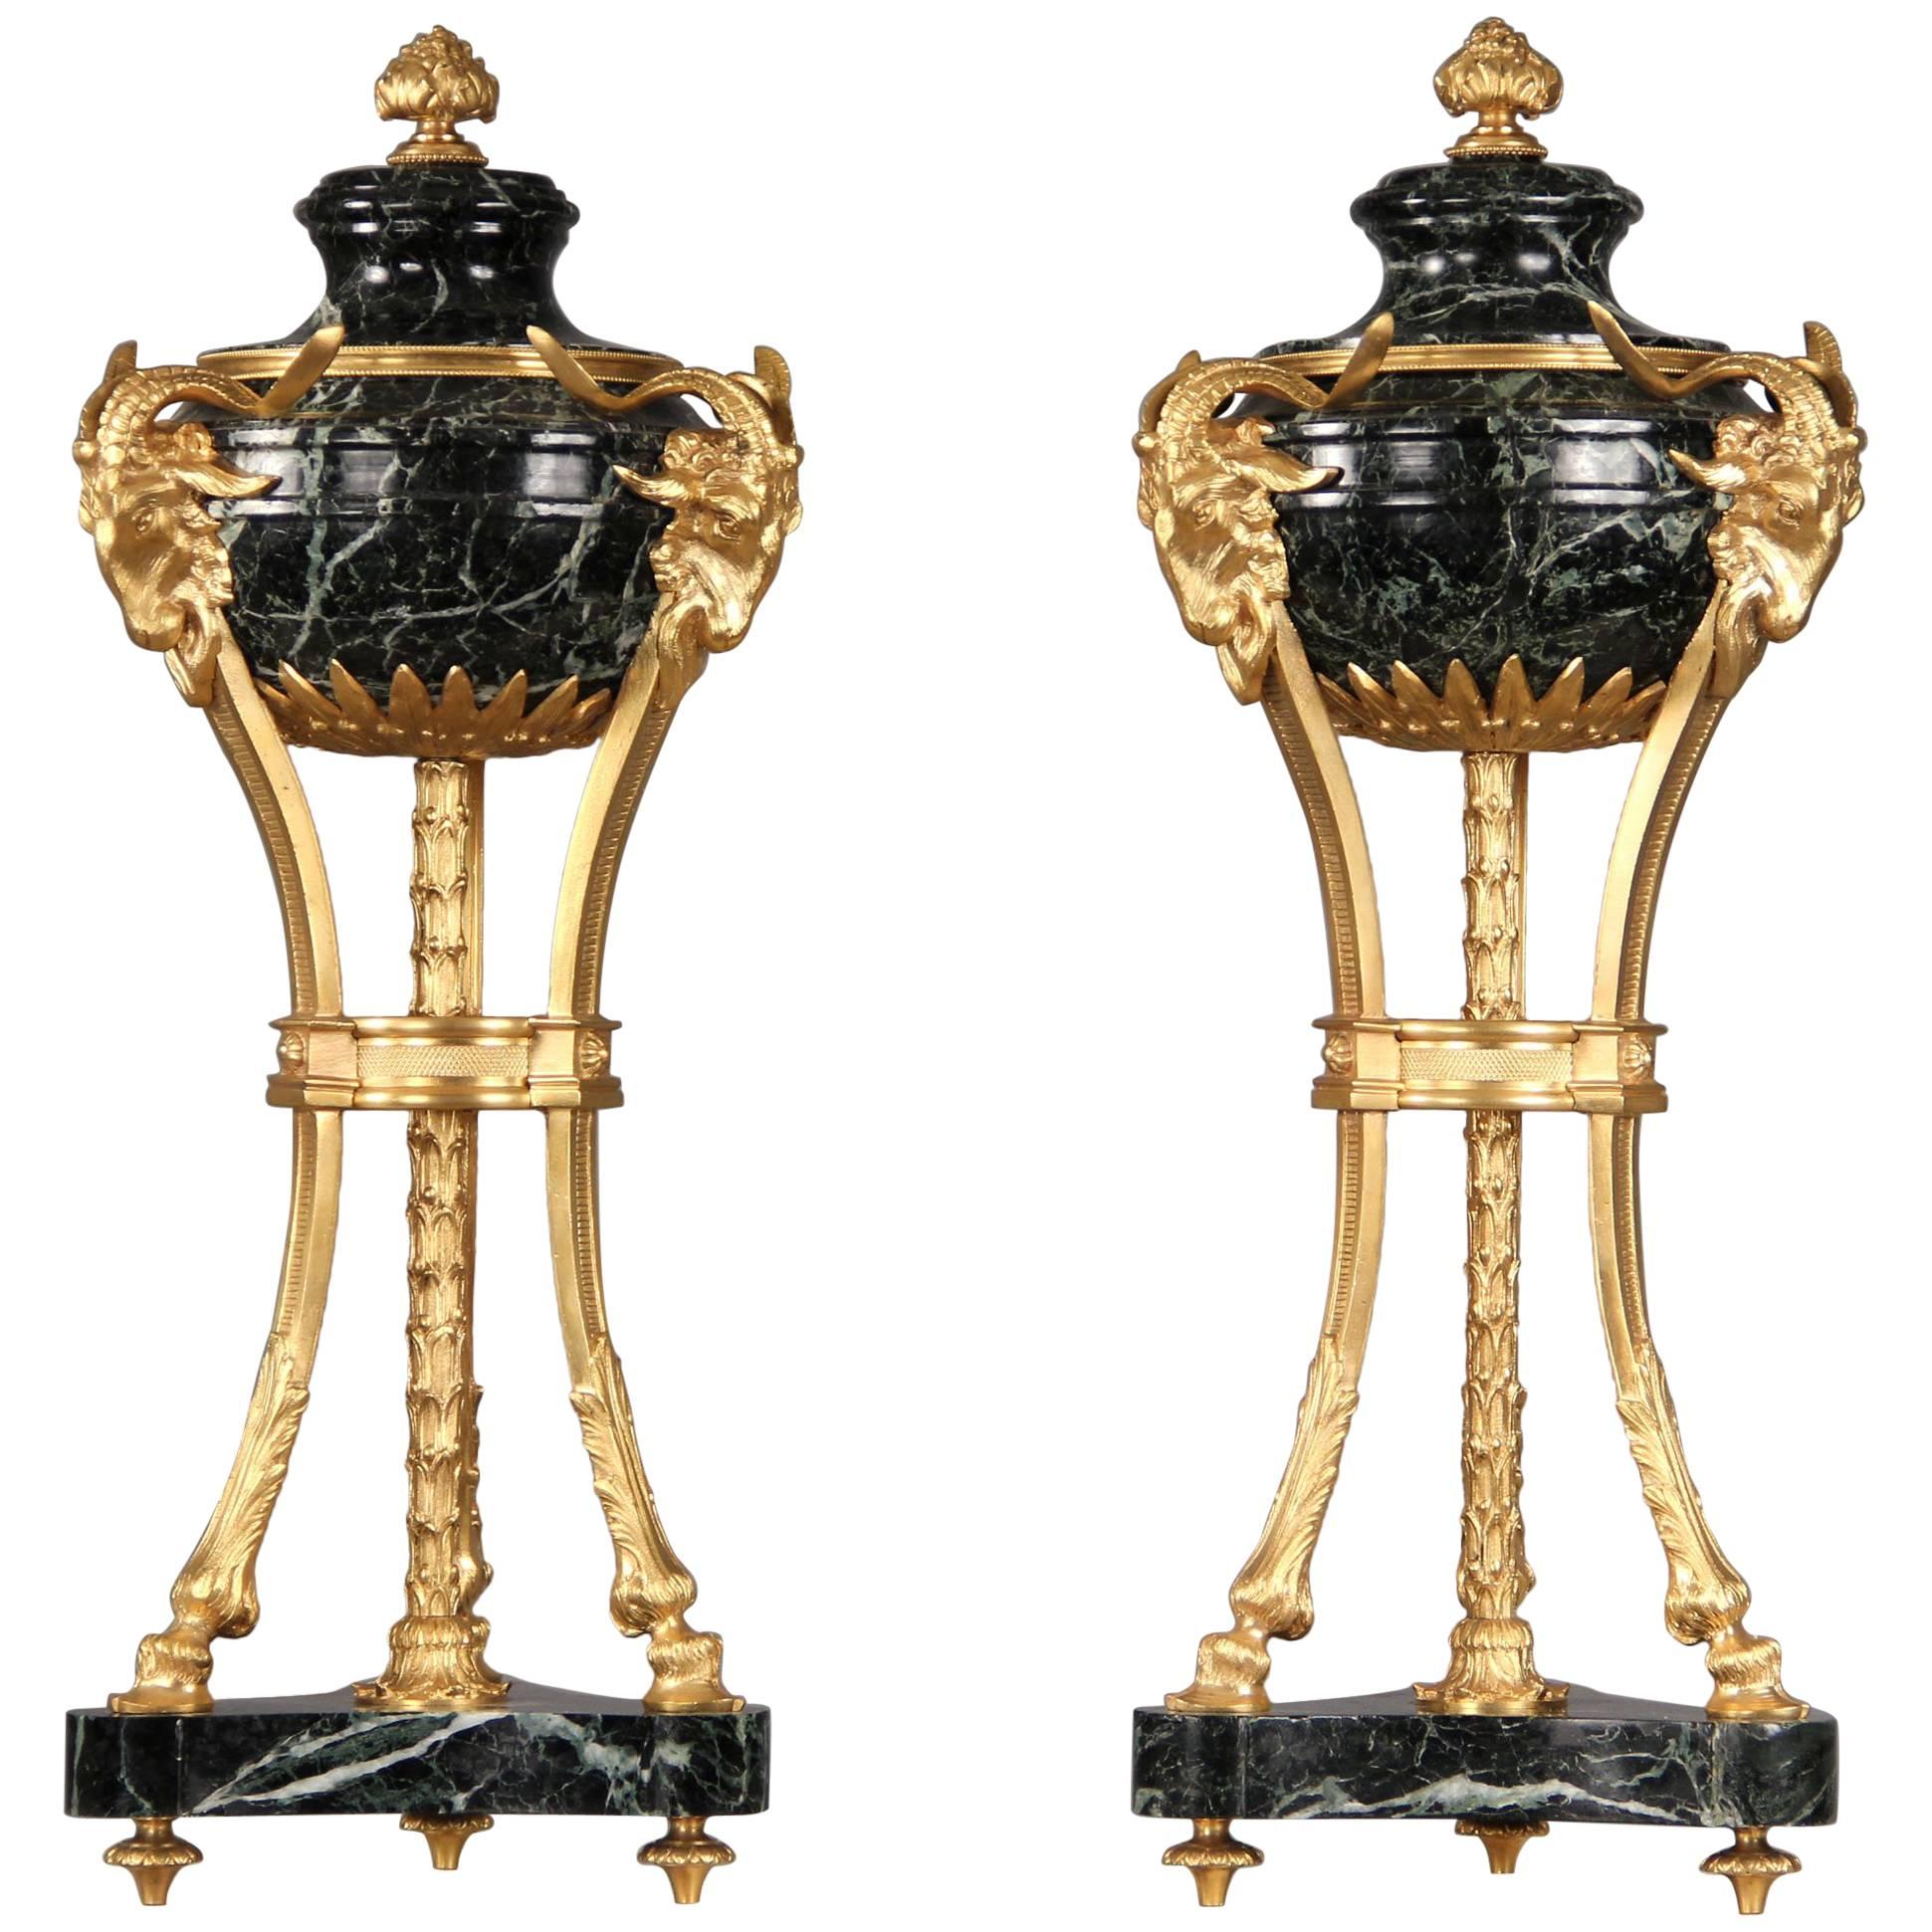 Pair of Late 19th Century Gilt Bronze Mounted Verde Antico Marble Cassolettes